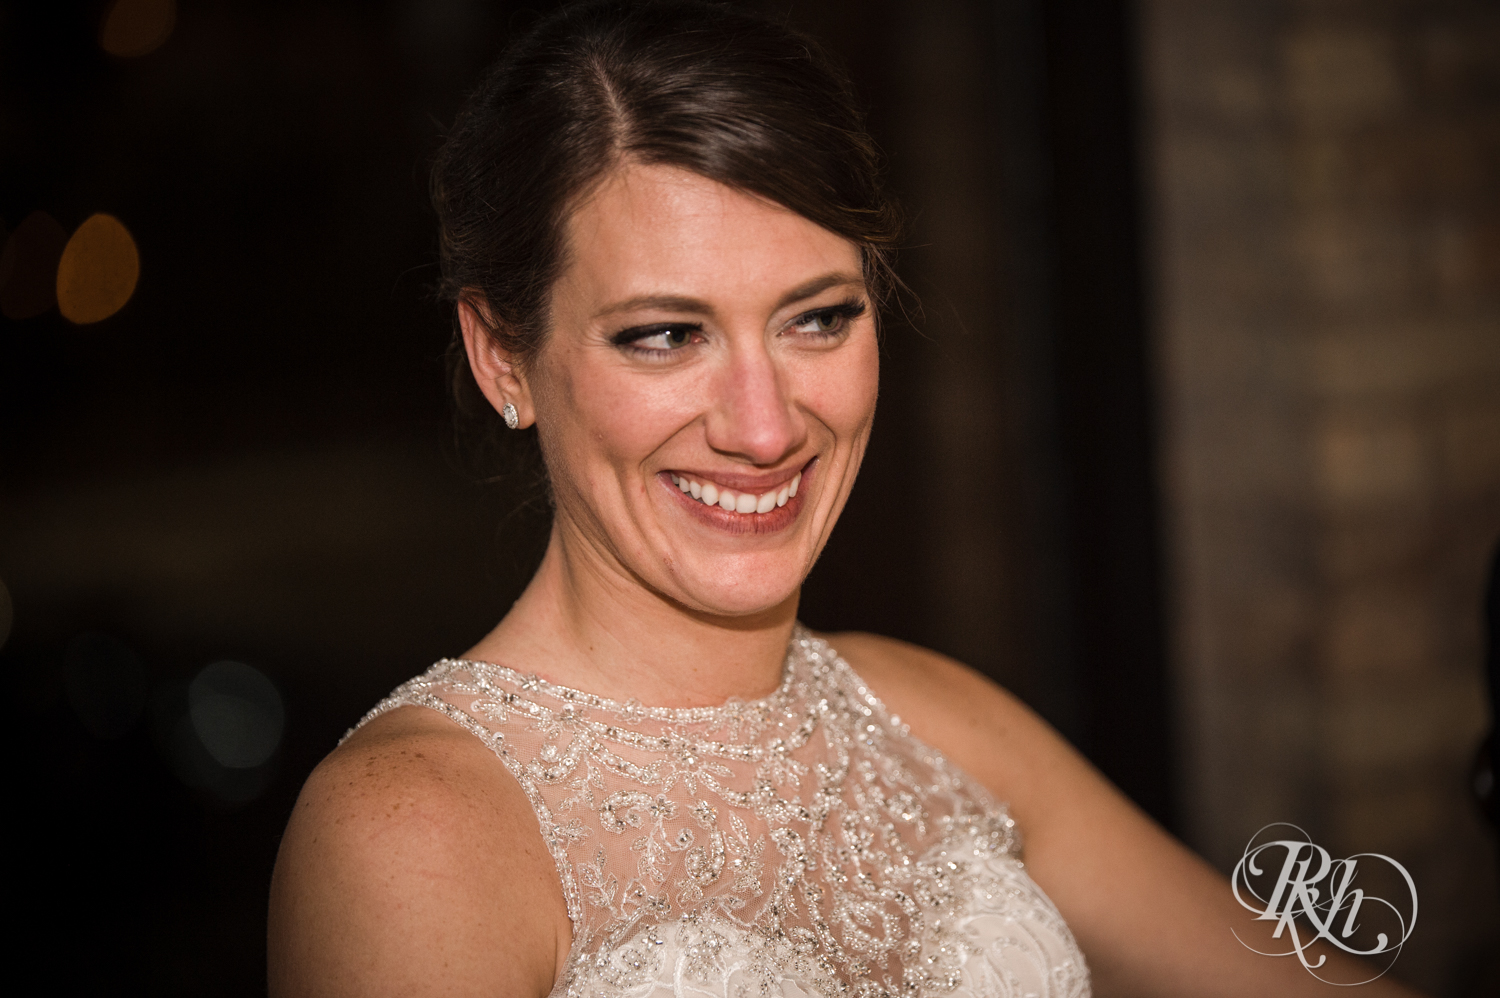 Bride smiles during speeches at wedding reception at the Lumber Exchange Event Center in Minneapolis, Minnesota.